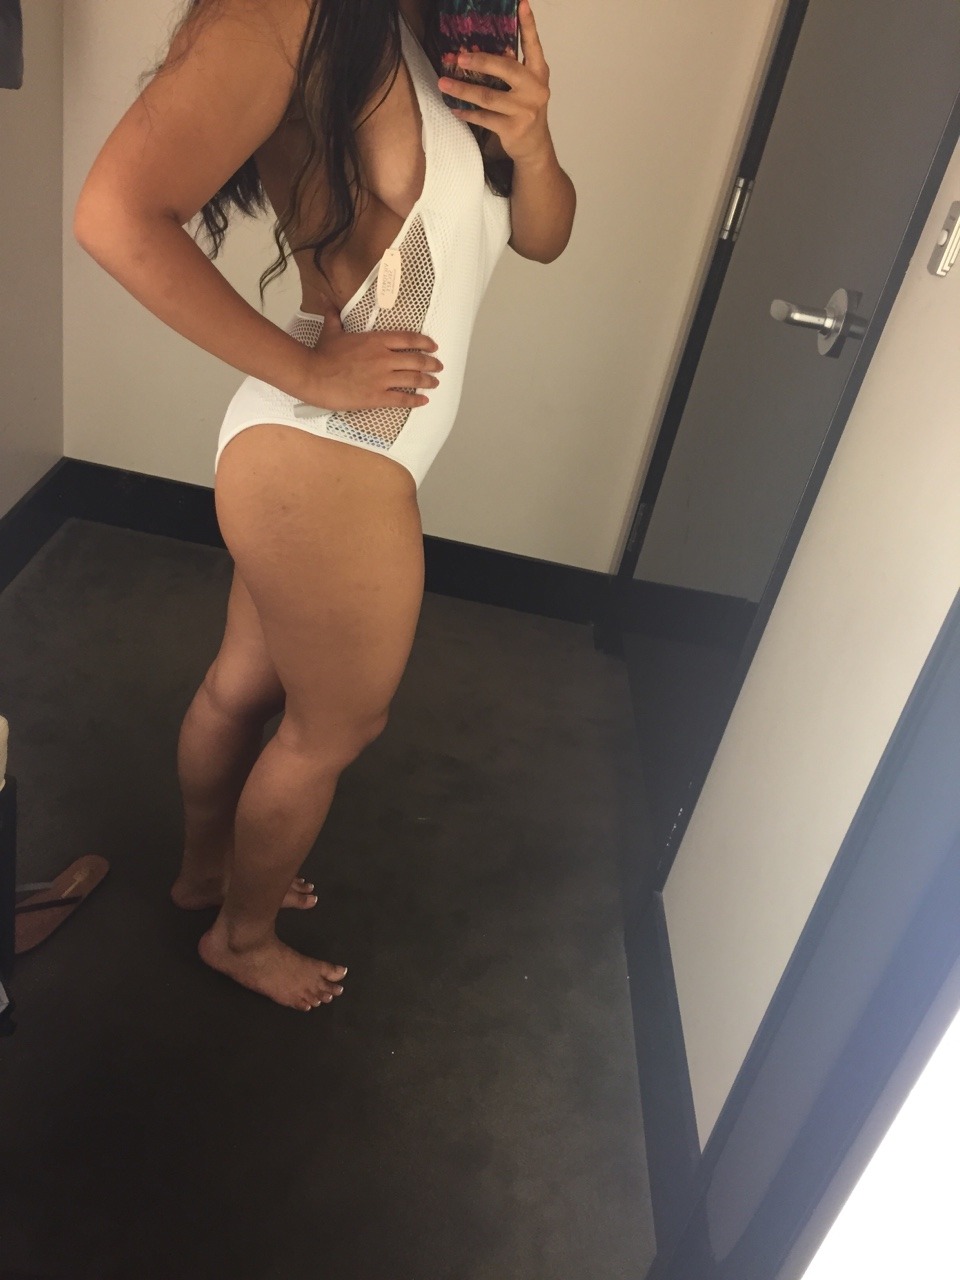 make-you-beg-for-it:  side boob 4 days in this swimsuit